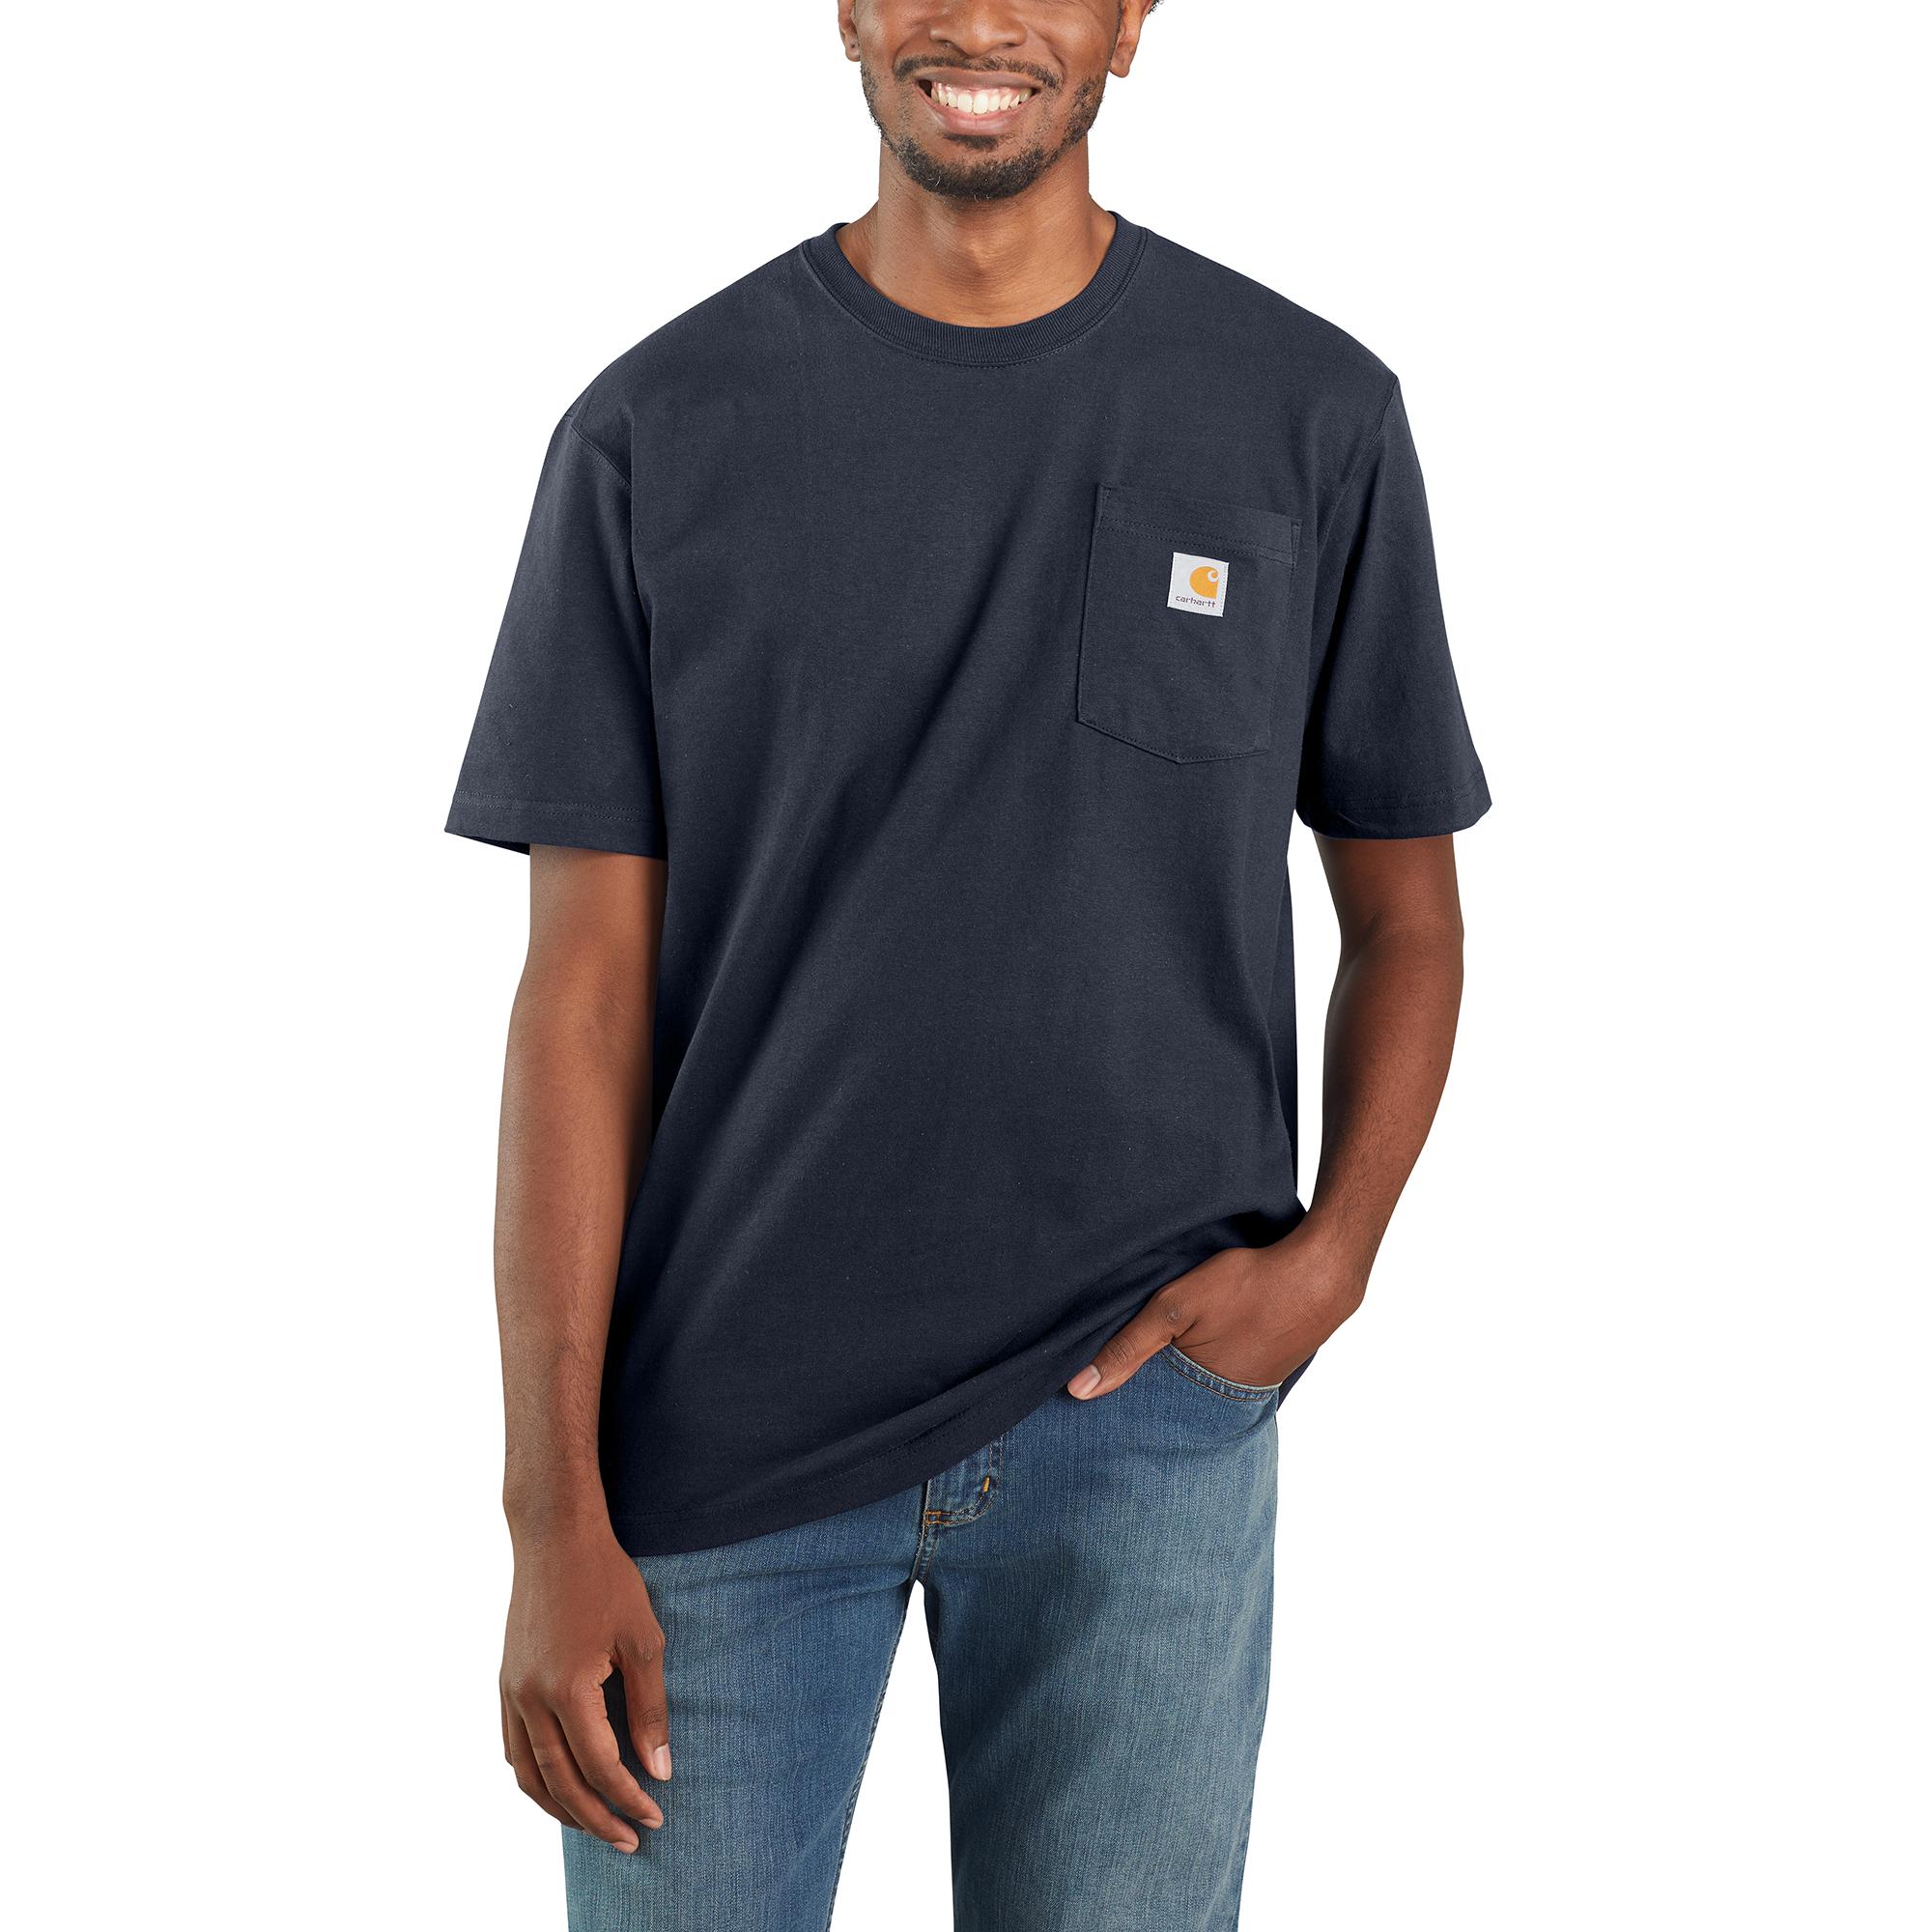 Carhartt Men's Knit Short Sleeve Solid T-shirt (X-large Tall) in